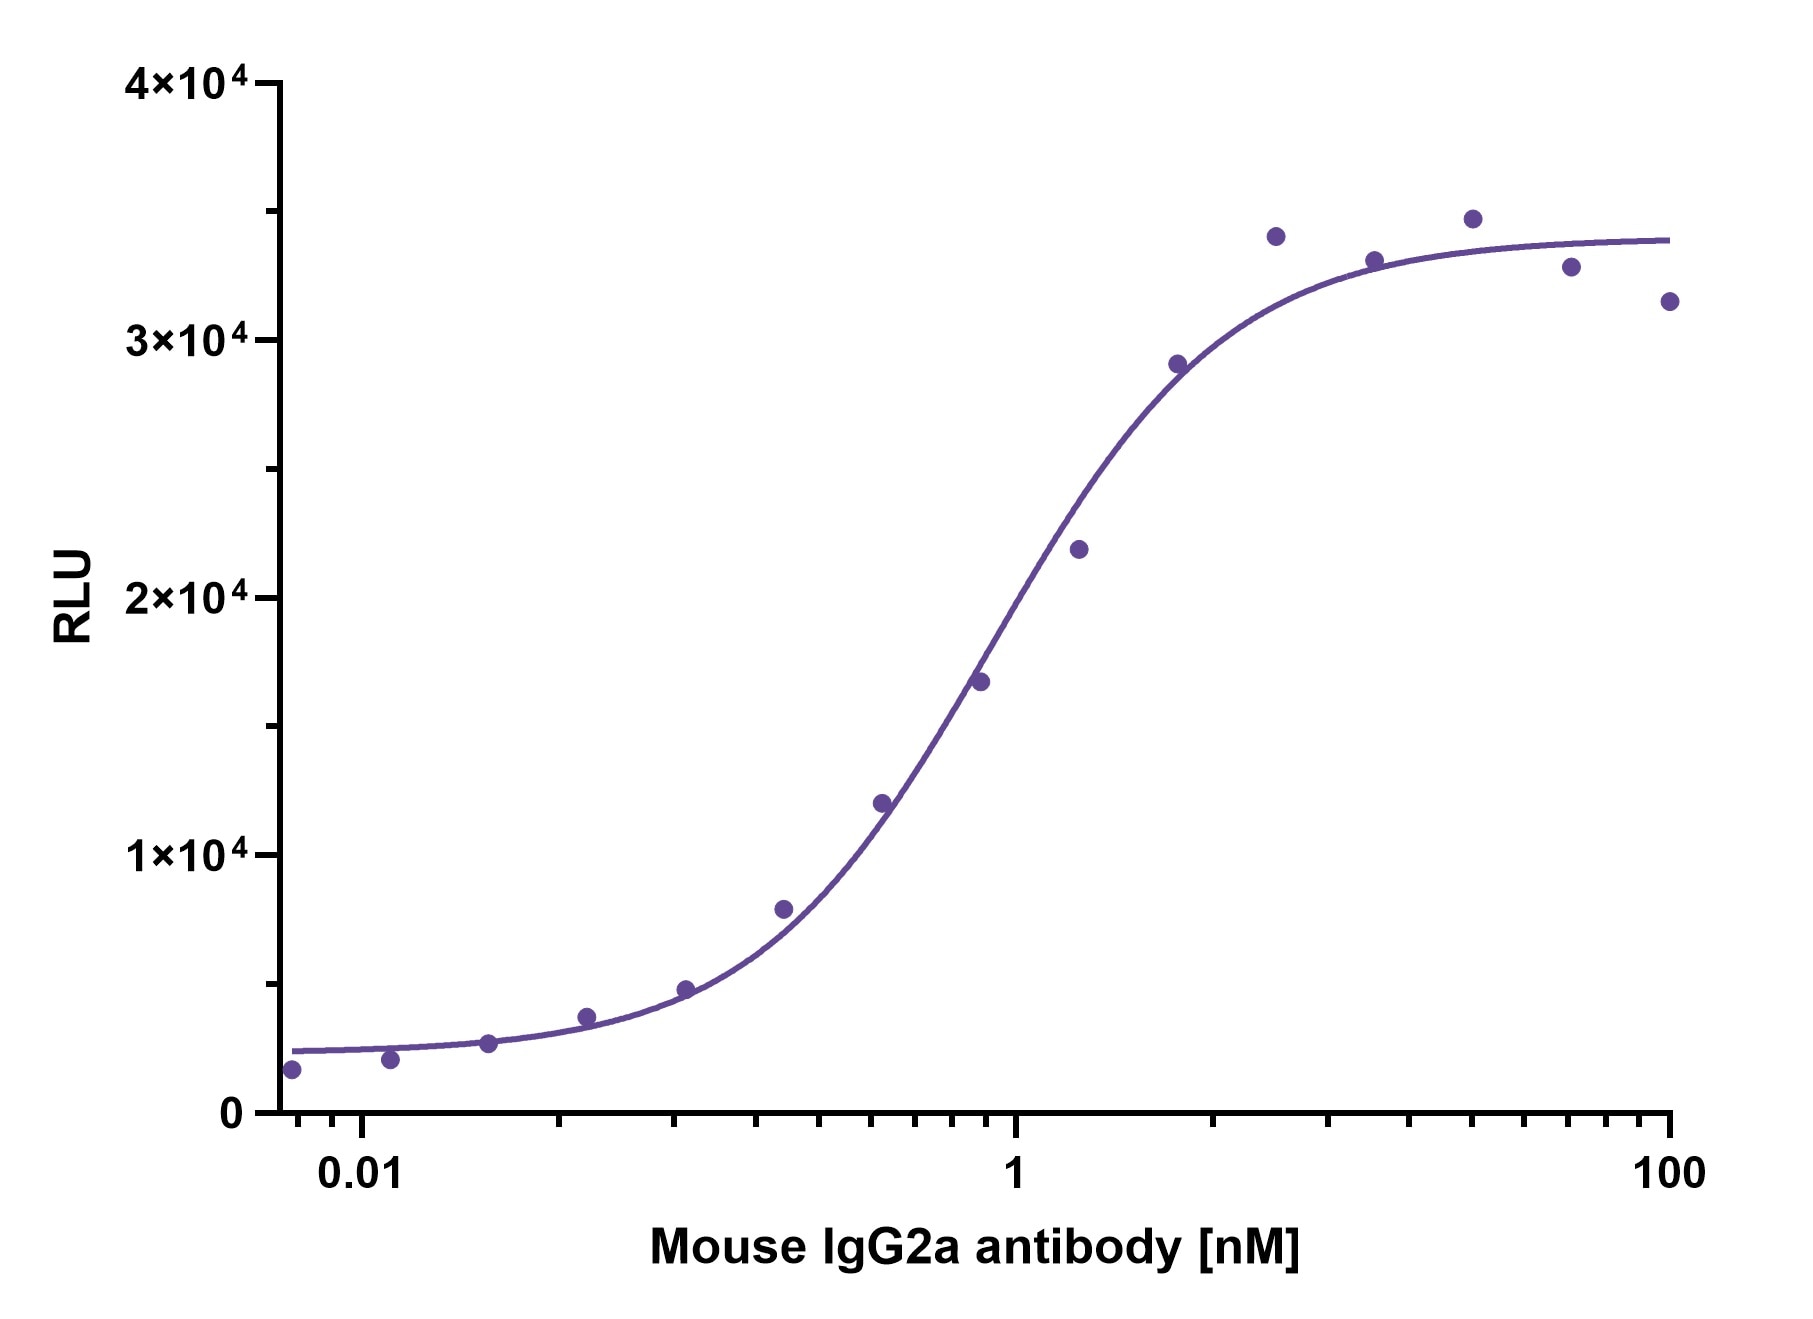 ELISA capture of mouse IgG2a antibody using Nano-CaptureLigand mouse IgG2a, Fc-specific VHH, biotinylated. 50 nM Nano-CaptureLigand mouse IgG2a, Fc-specific VHH, biotinylated was used for coating on an avidin-coated MaxiSorp plate. Mouse IgG2a antibody was titrated in a 1:2 dilution series and detected with an alkaline phosphatase-conjugated detection antibody.